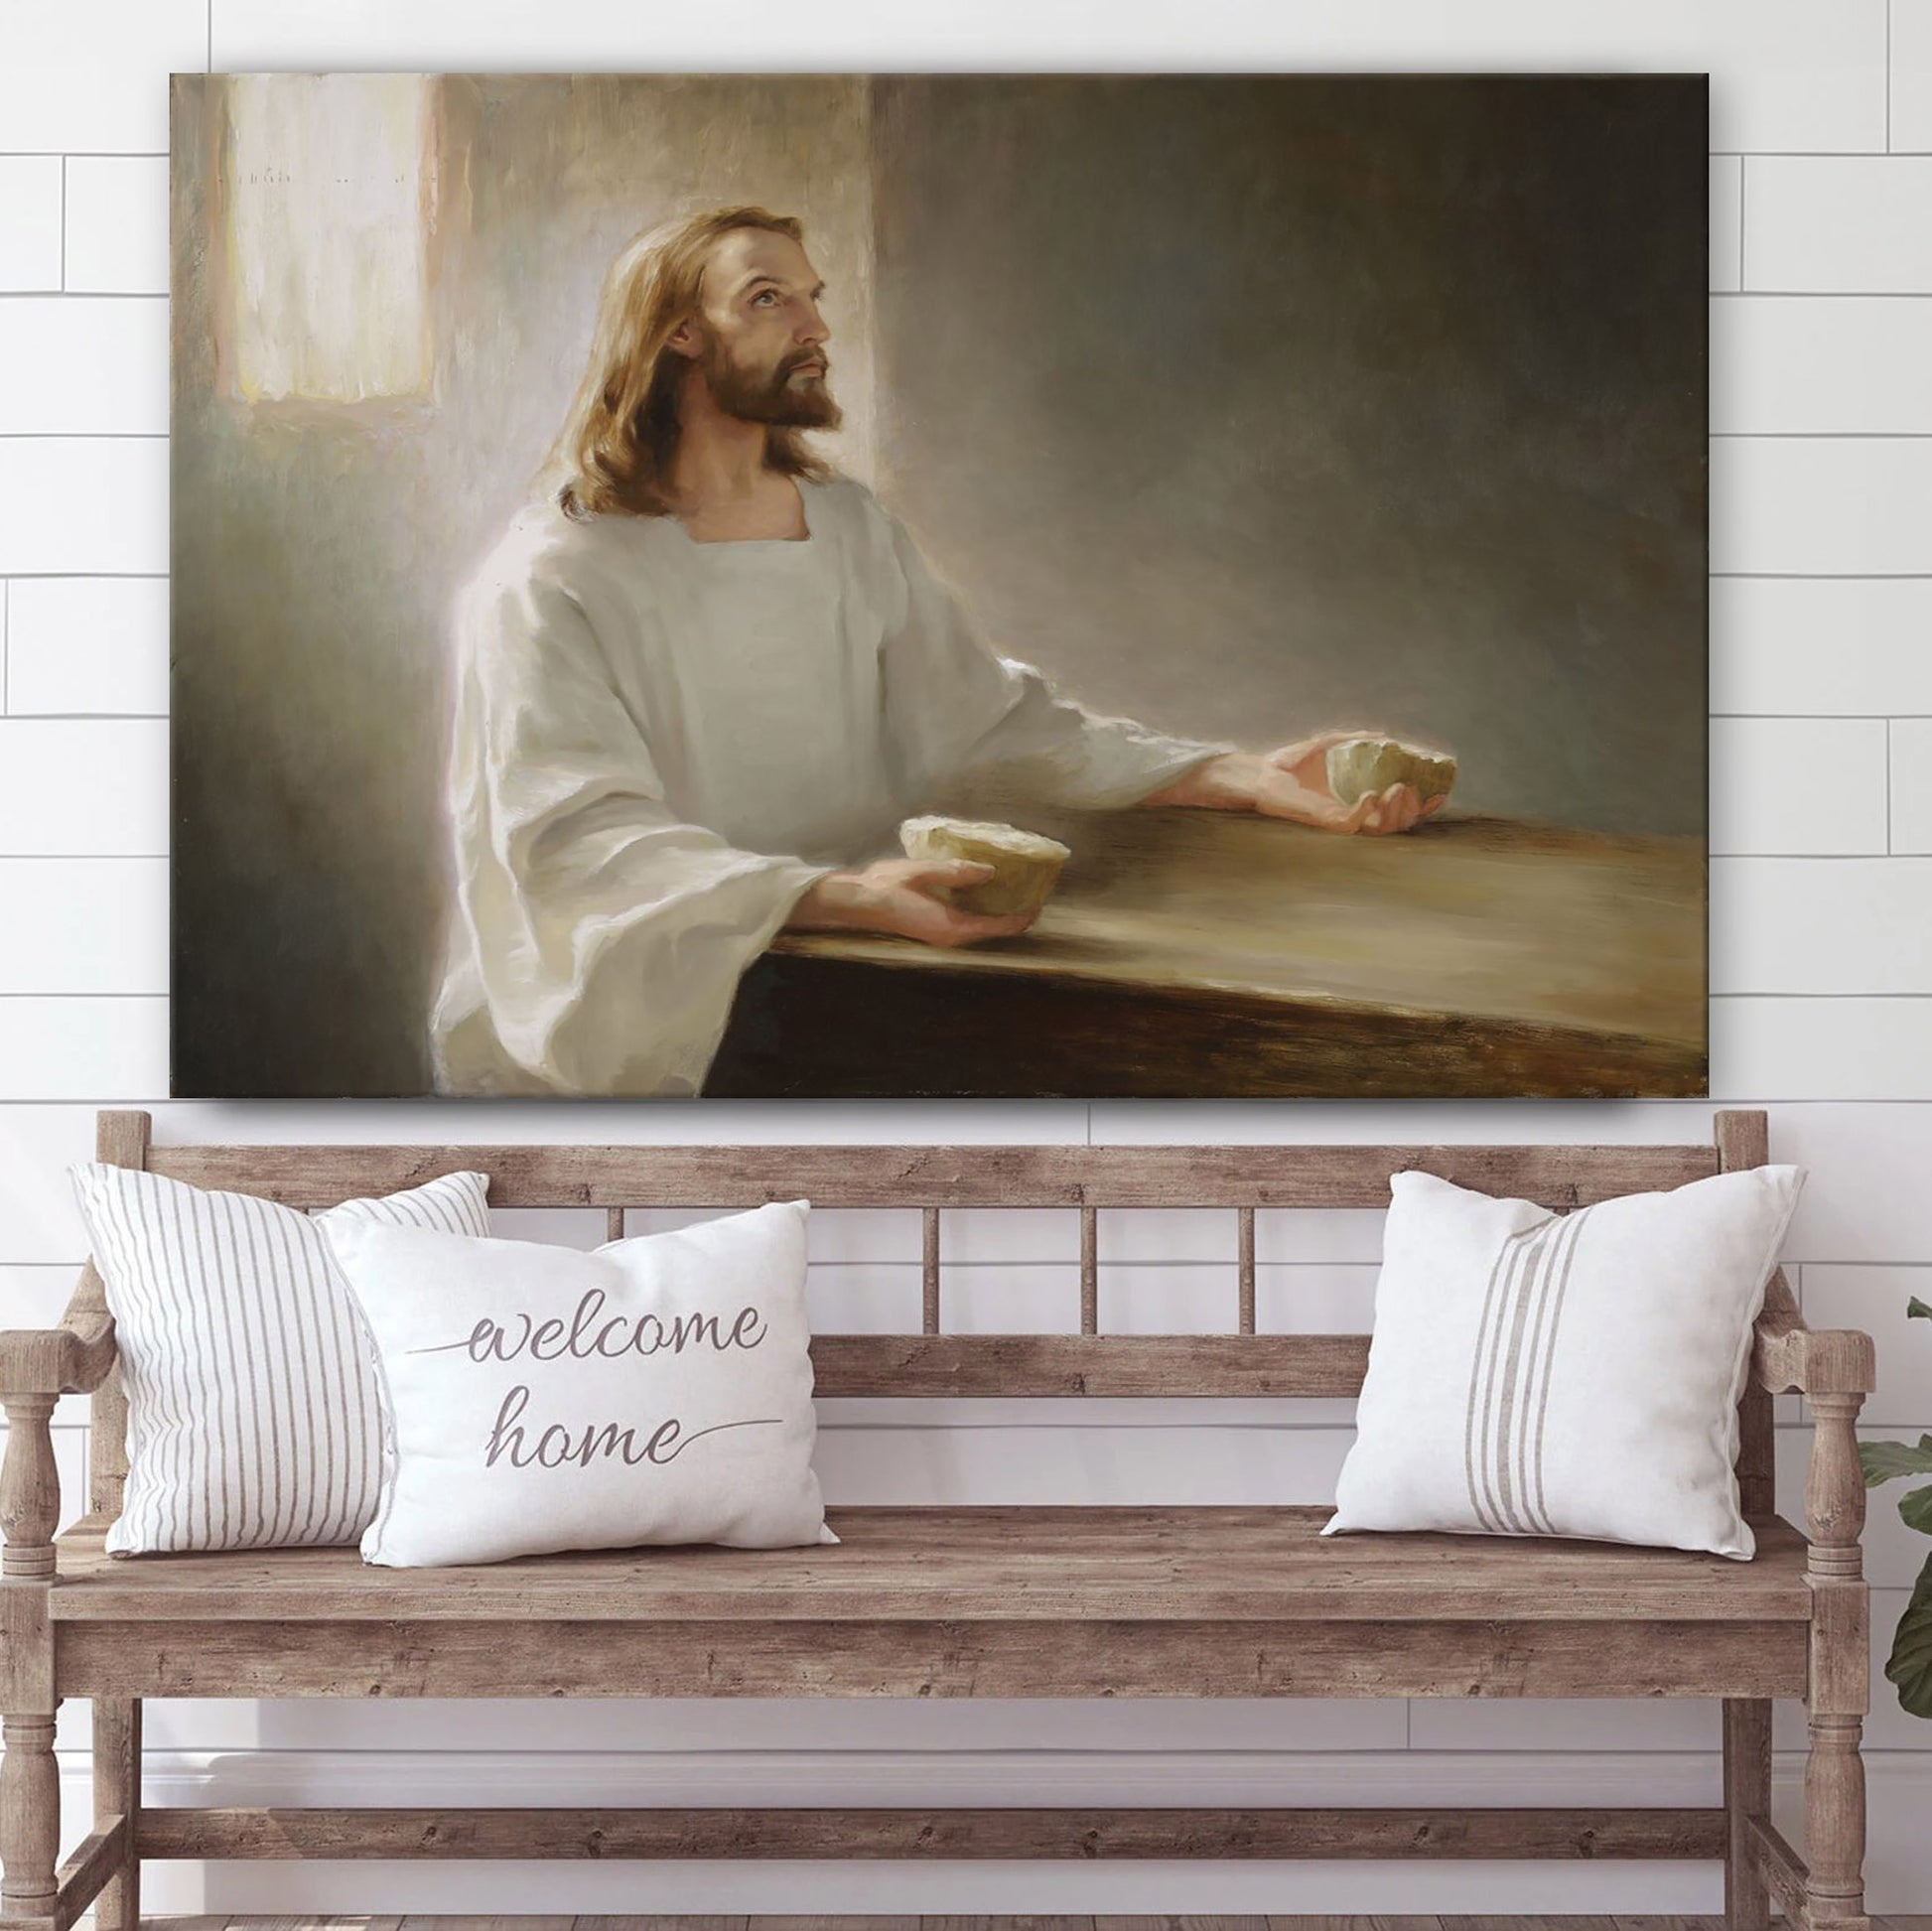 Pictures Of Jesus - Jesus Canvas Wall Art - Christian Wall Art